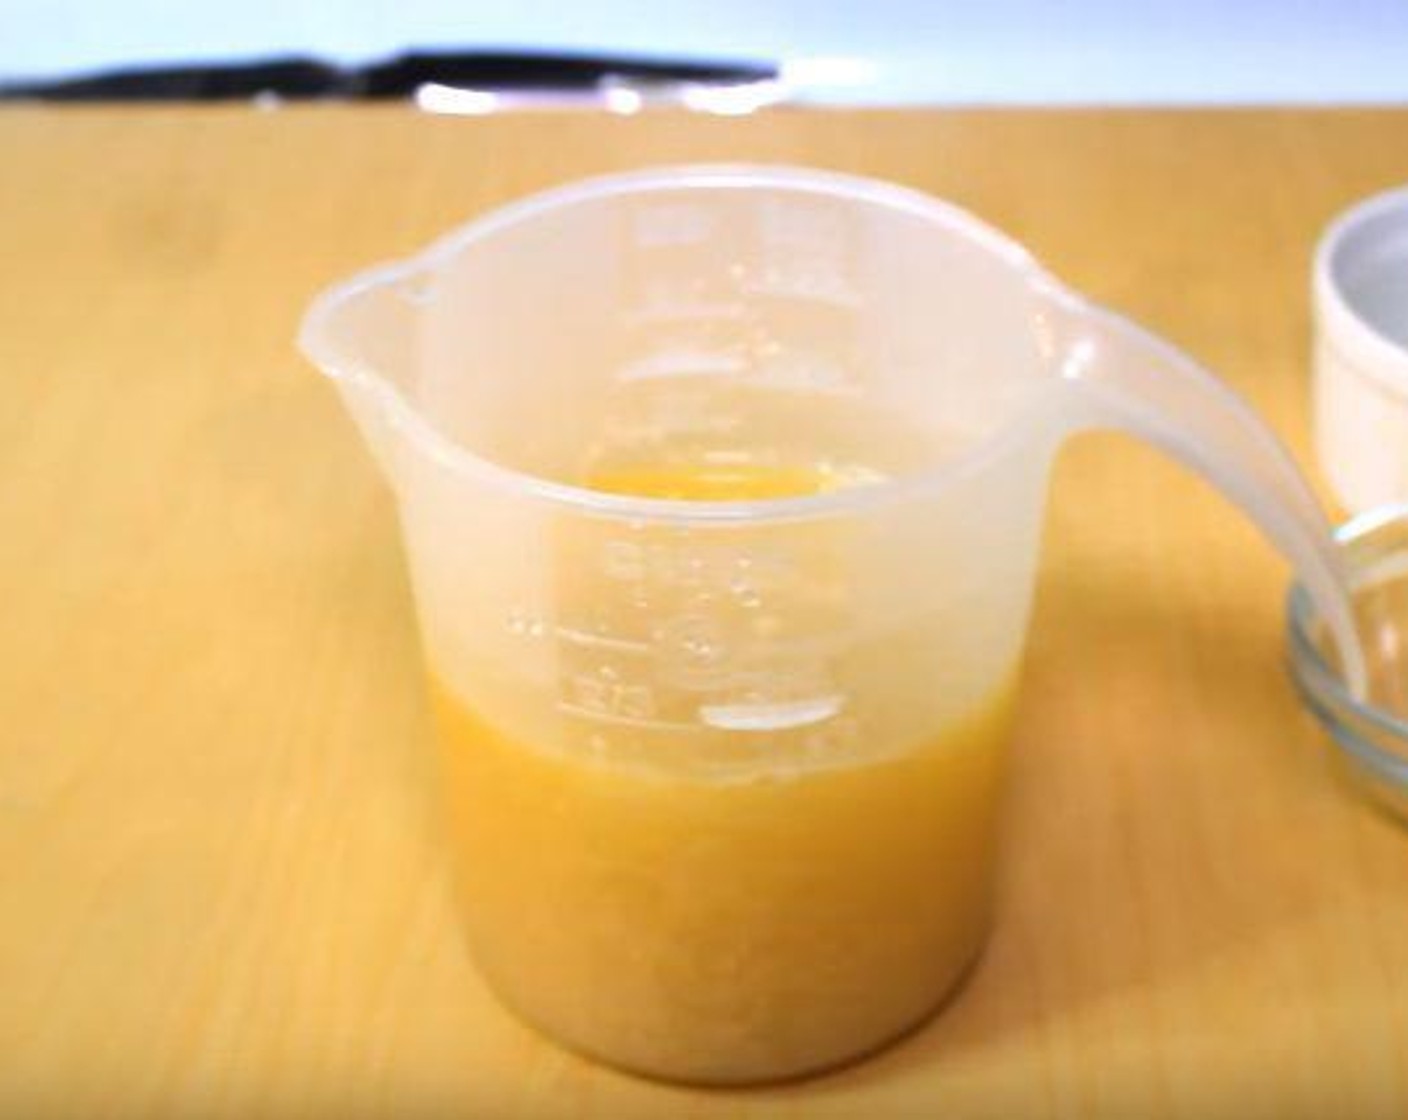 step 1 To the Water (1 1/4 cups), add the Butter (3 Tbsp), Vegetable Shortening (3 Tbsp), Instant Dry Yeast (1/2 Tbsp), and Granulated Sugar (1 tsp). Mix together and let sit for 5 minutes.